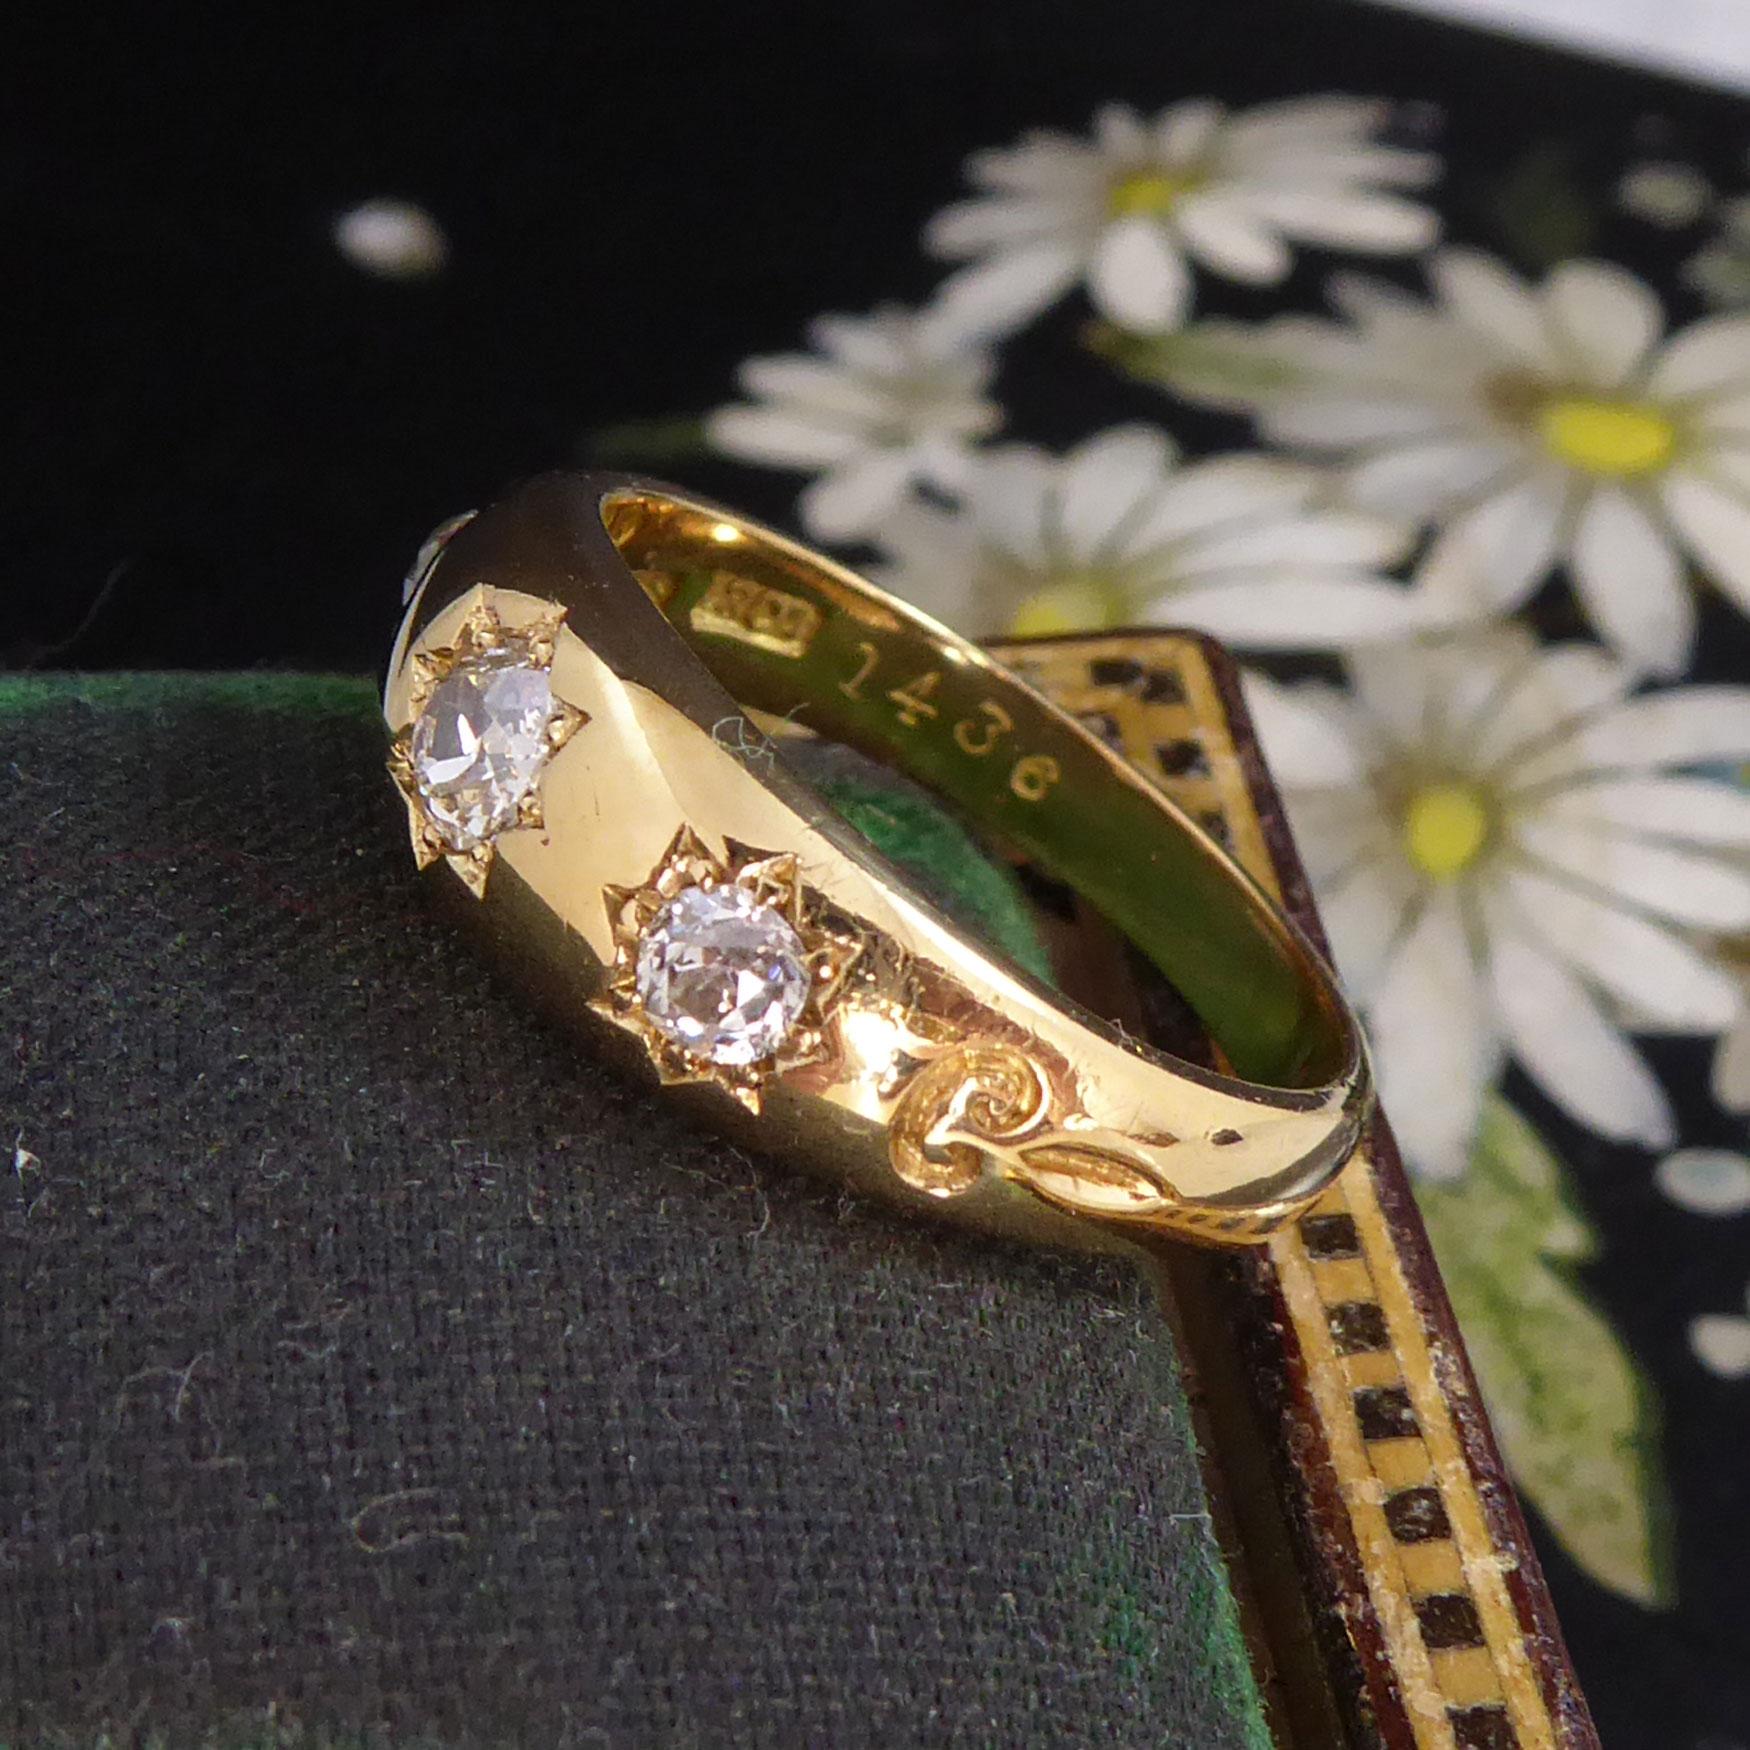 A classic Victorian diamond ring set with three sparkling old diamonds in a gyspy star settings.  The ring has been decorated with a small scroll pattern to each shoulder which adds to the quality finish of the ring.  The band is quite substantial